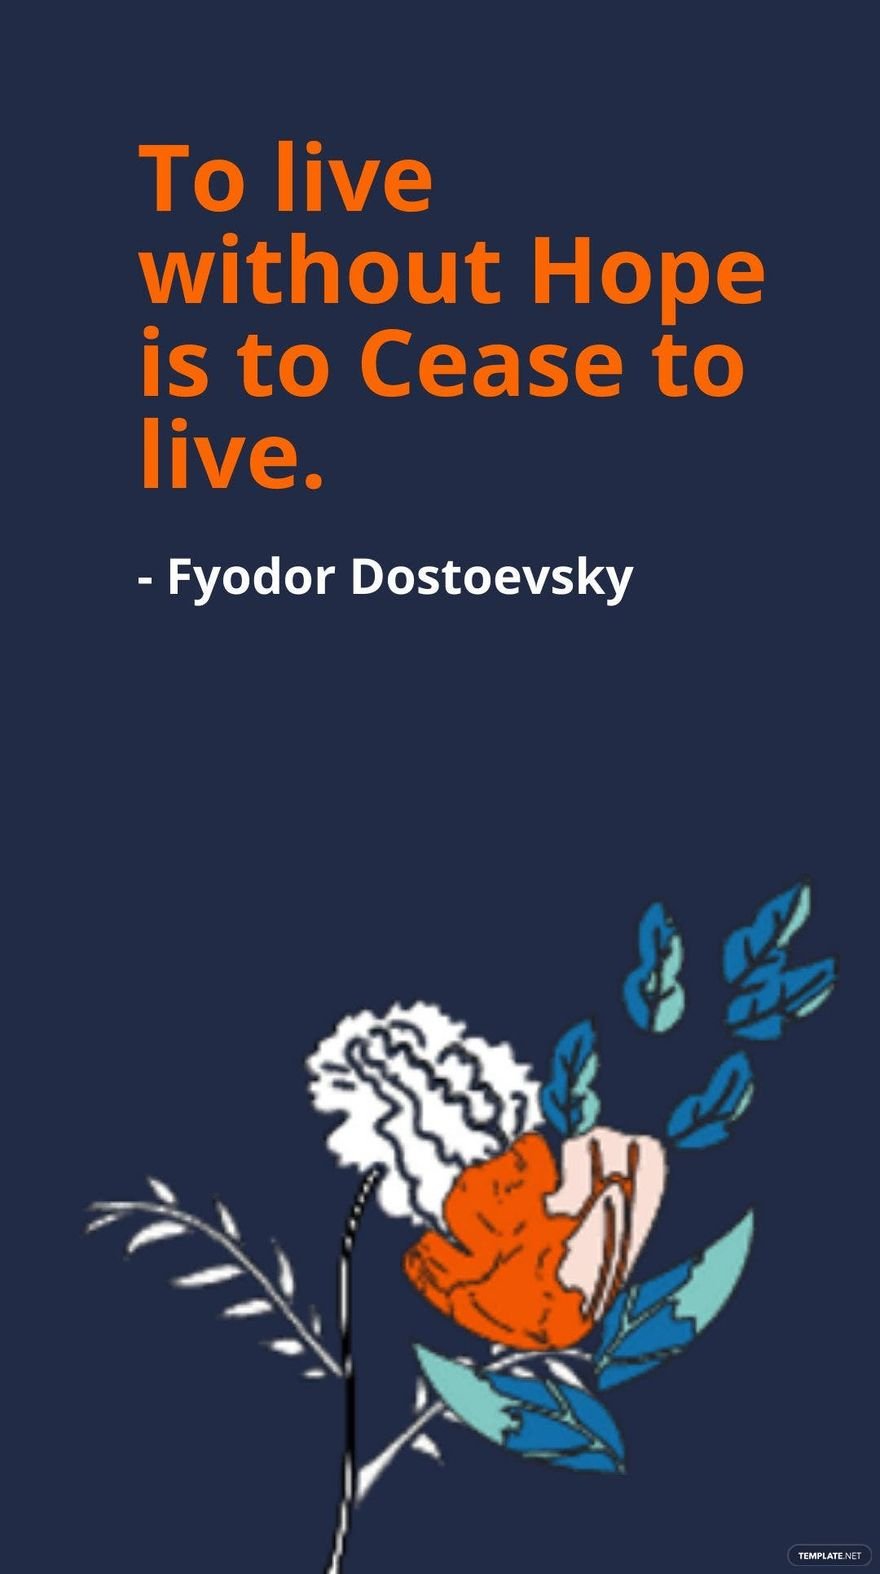 Fyodor Dostoevsky - To live without Hope is to Cease to live.